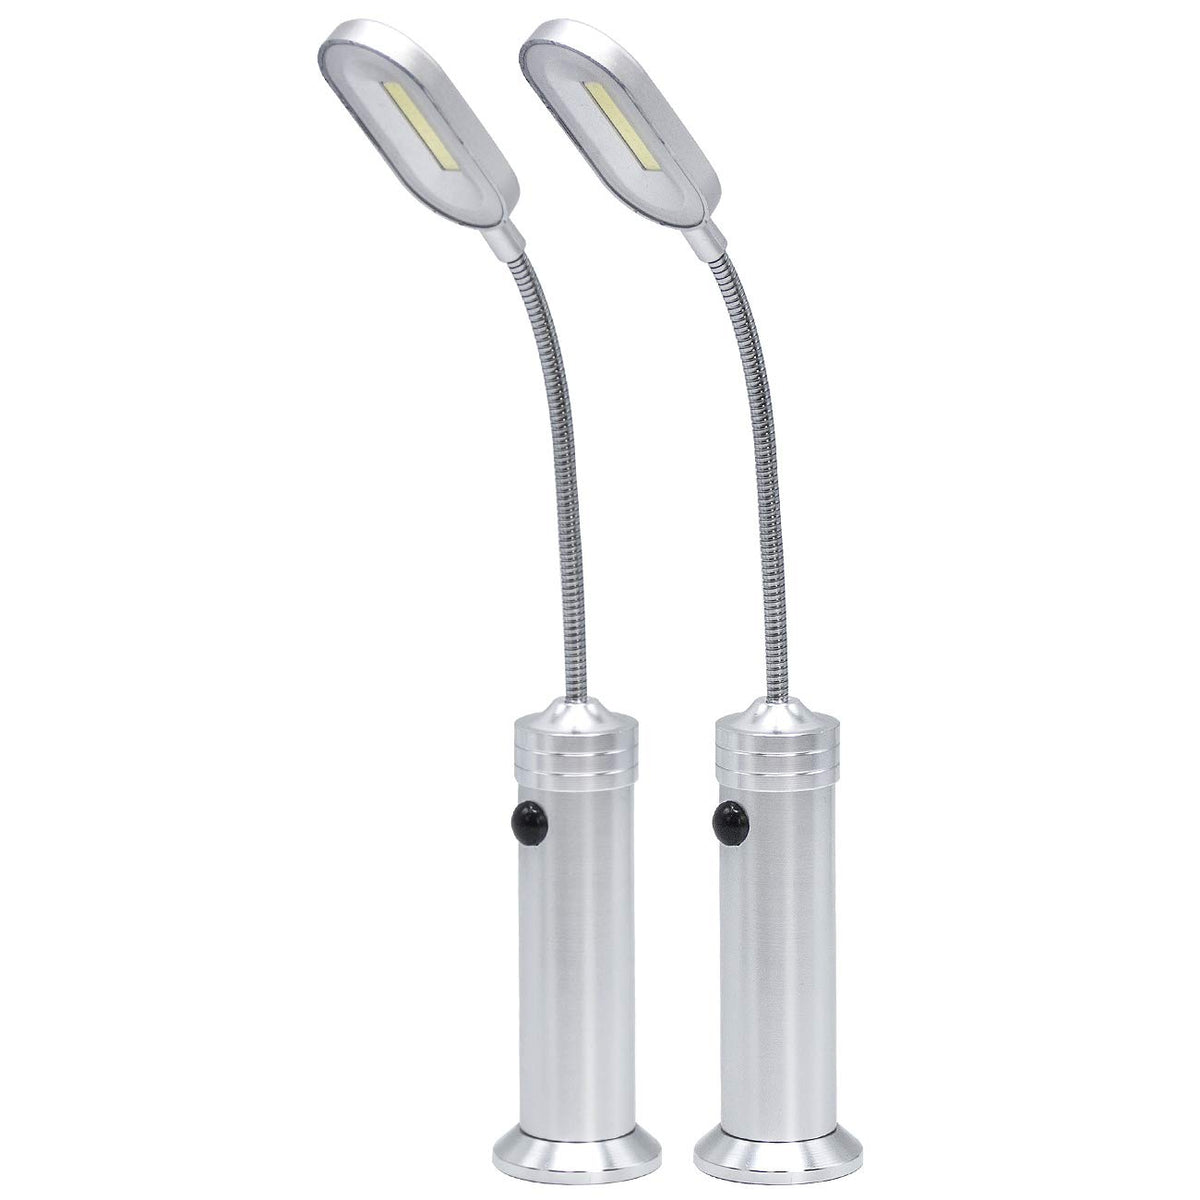 LED Magnetic Base light with gooseneck & weather resistant